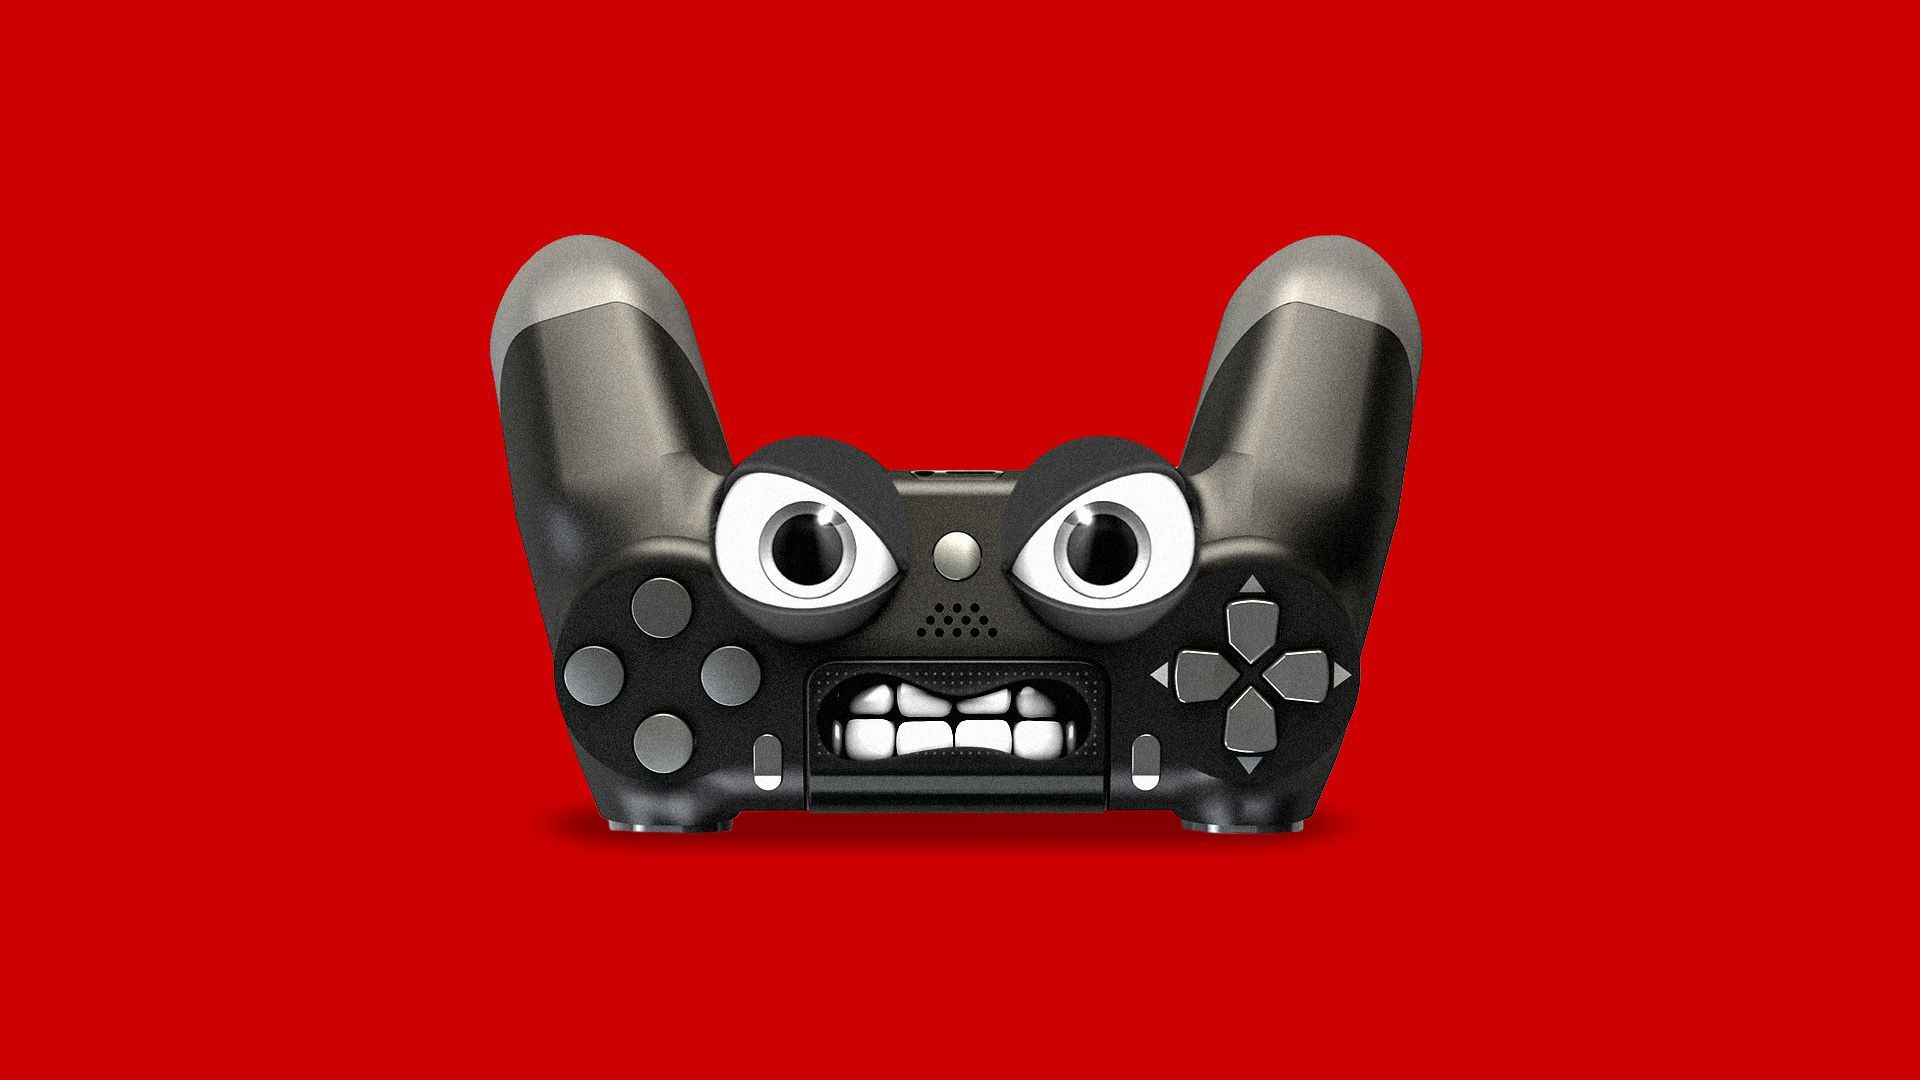 Illustration of angry video game controller